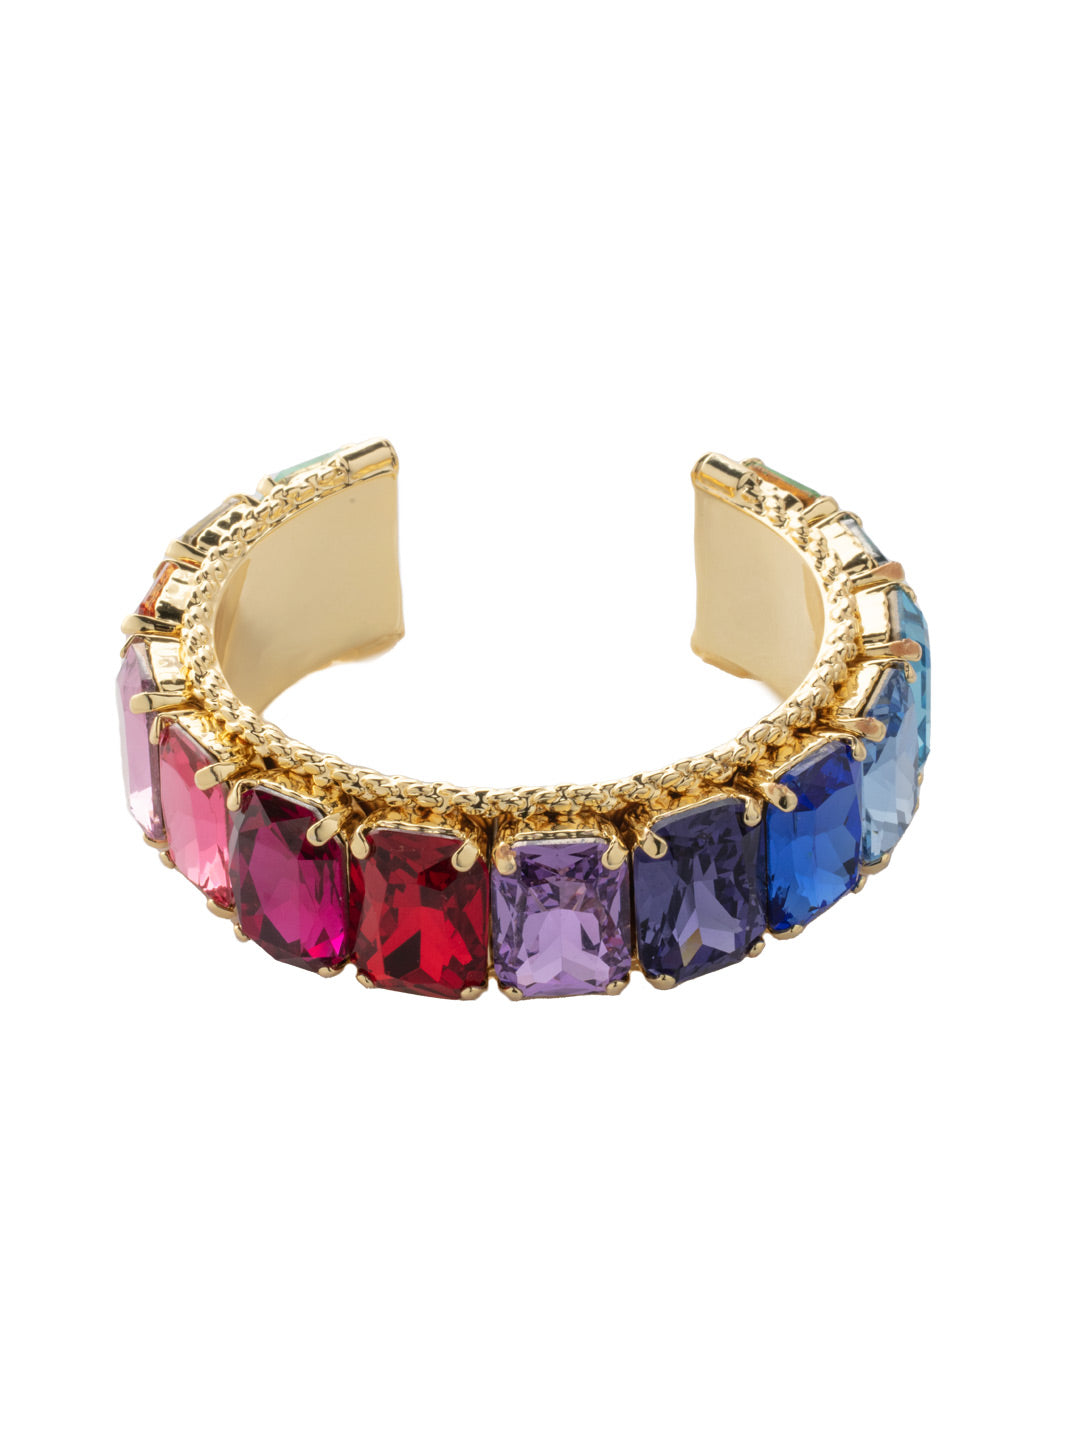 Set-In-Stone Cuff Bracelet - BCL17BGPRI - <p>Shimmering crystals create a look that is so gorgeous, you'll want to show it off all the time! Luckily, with so many ways to pair this piece, you can! Show them what you got, fashionista! From Sorrelli's Prism collection in our Bright Gold-tone finish.</p>